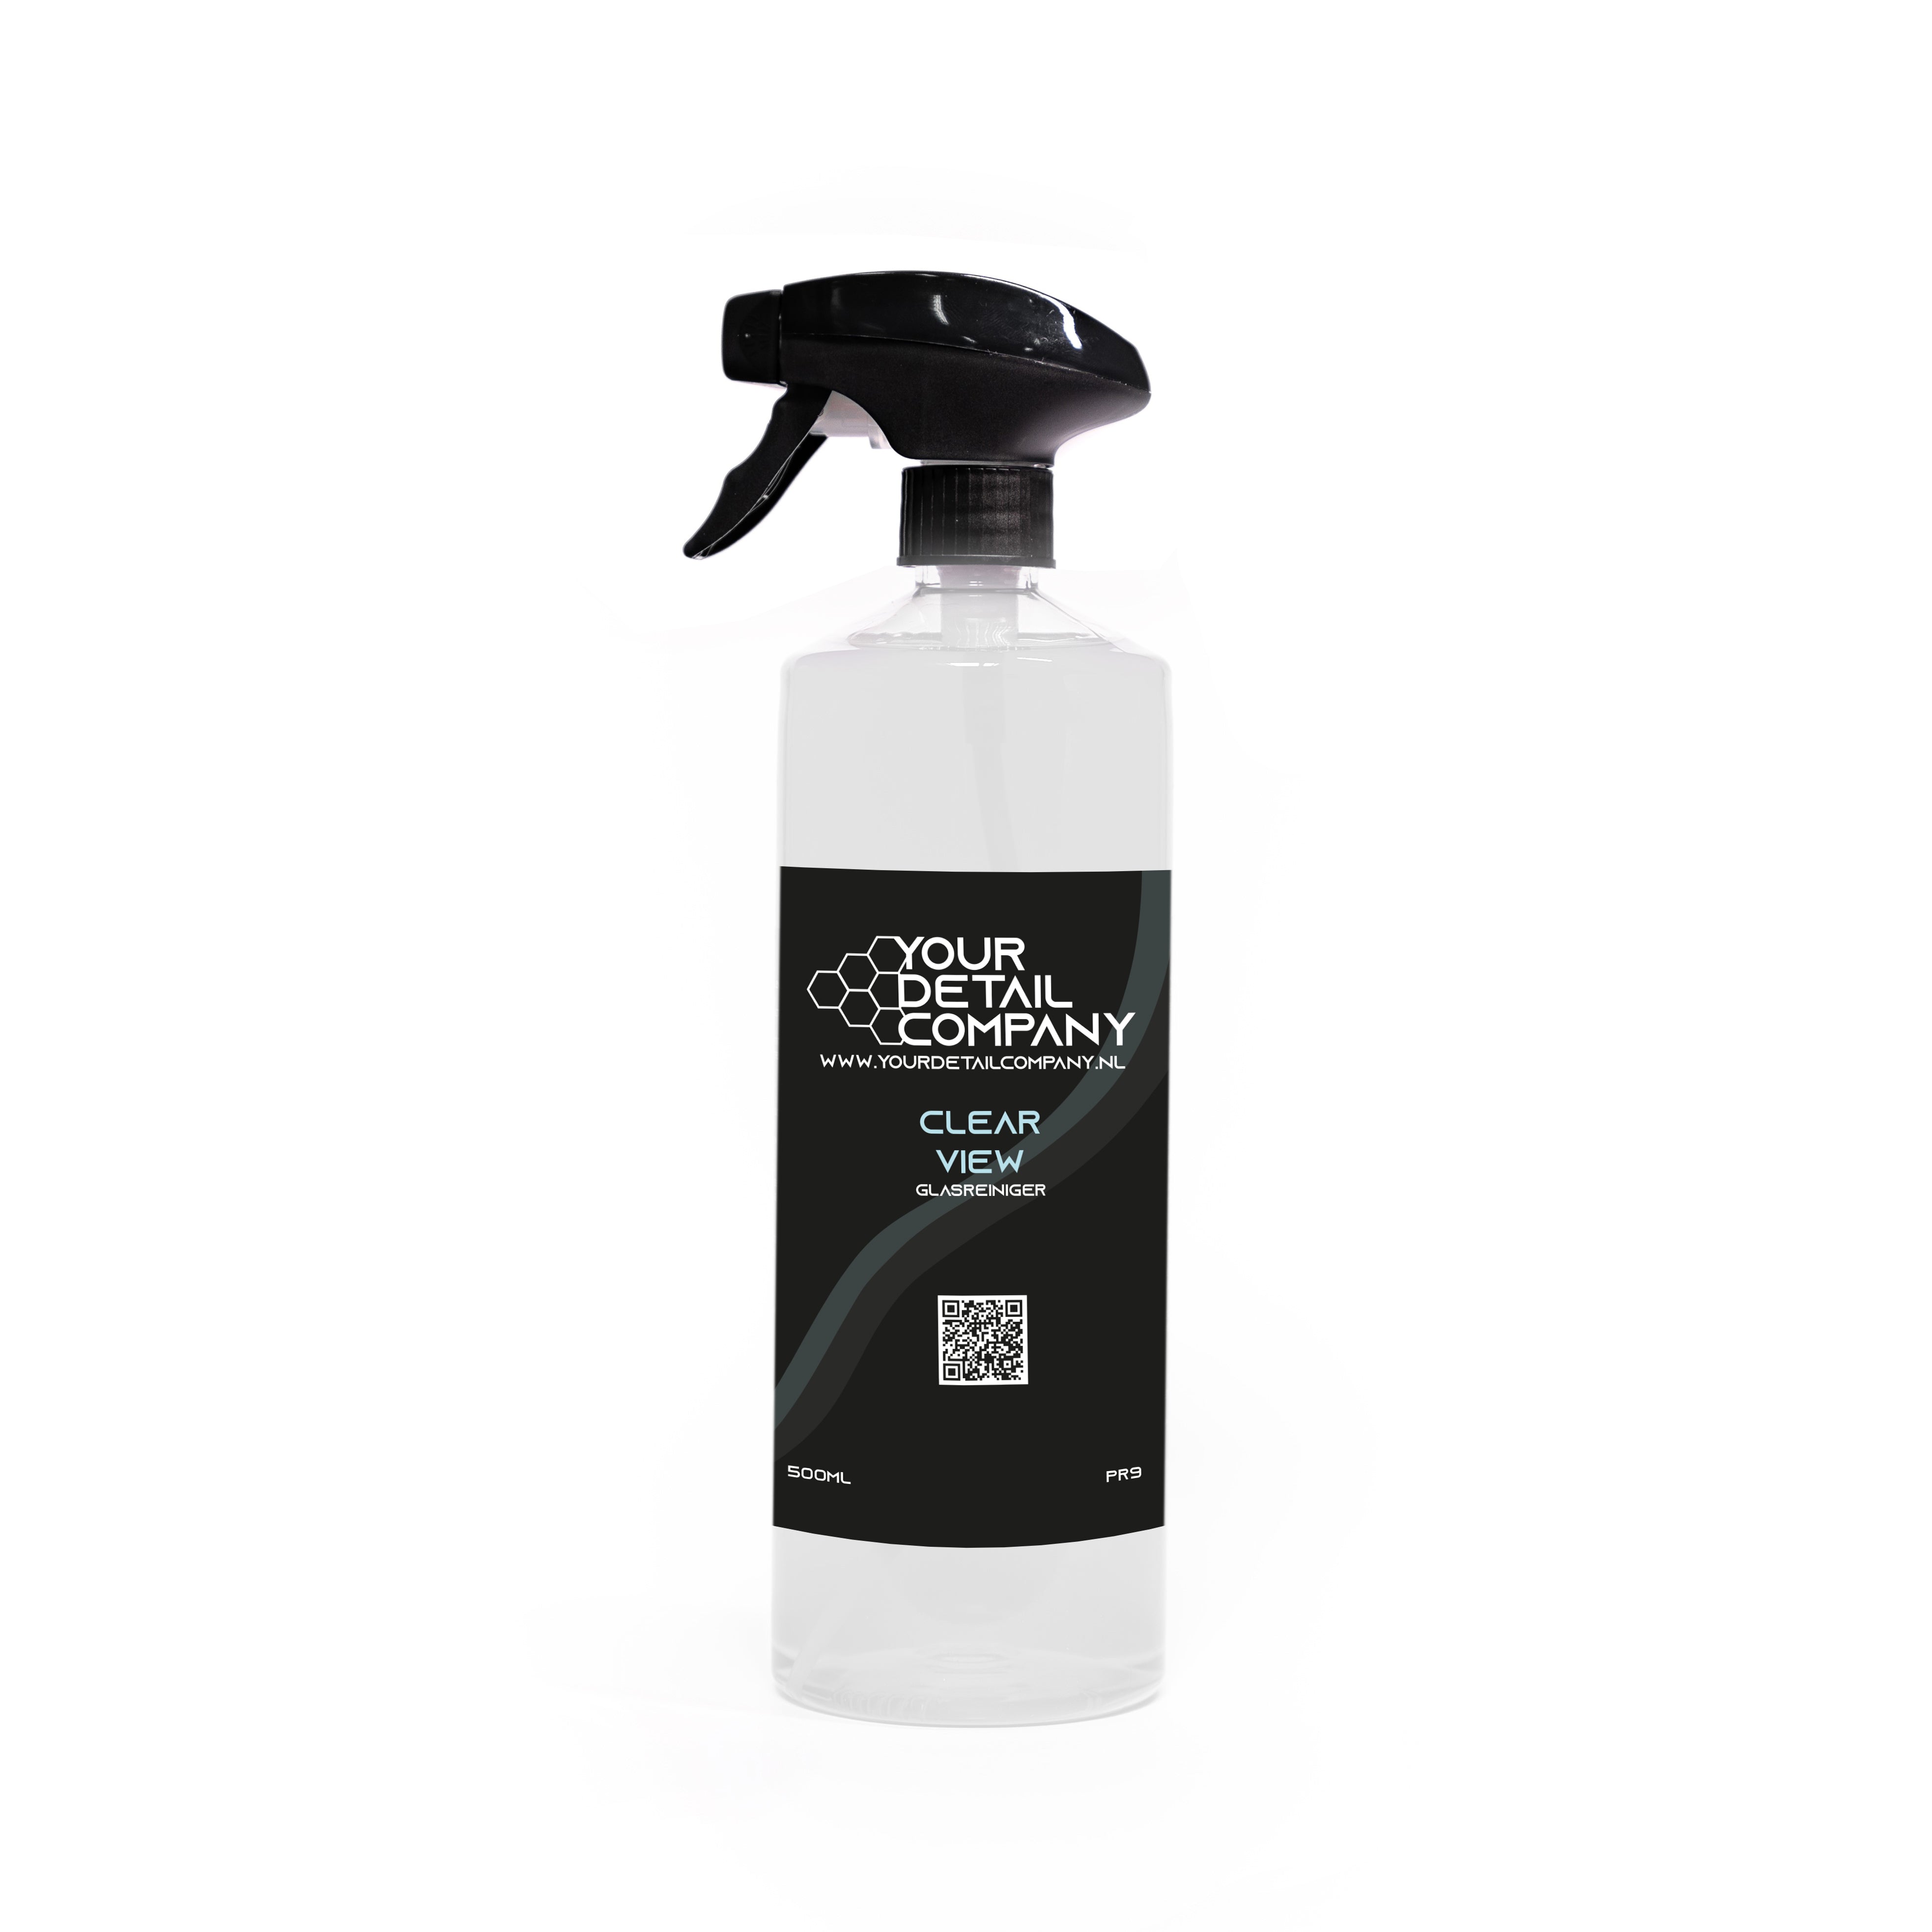 Your Detail Company - Clear View - Glasreiniger - 1L